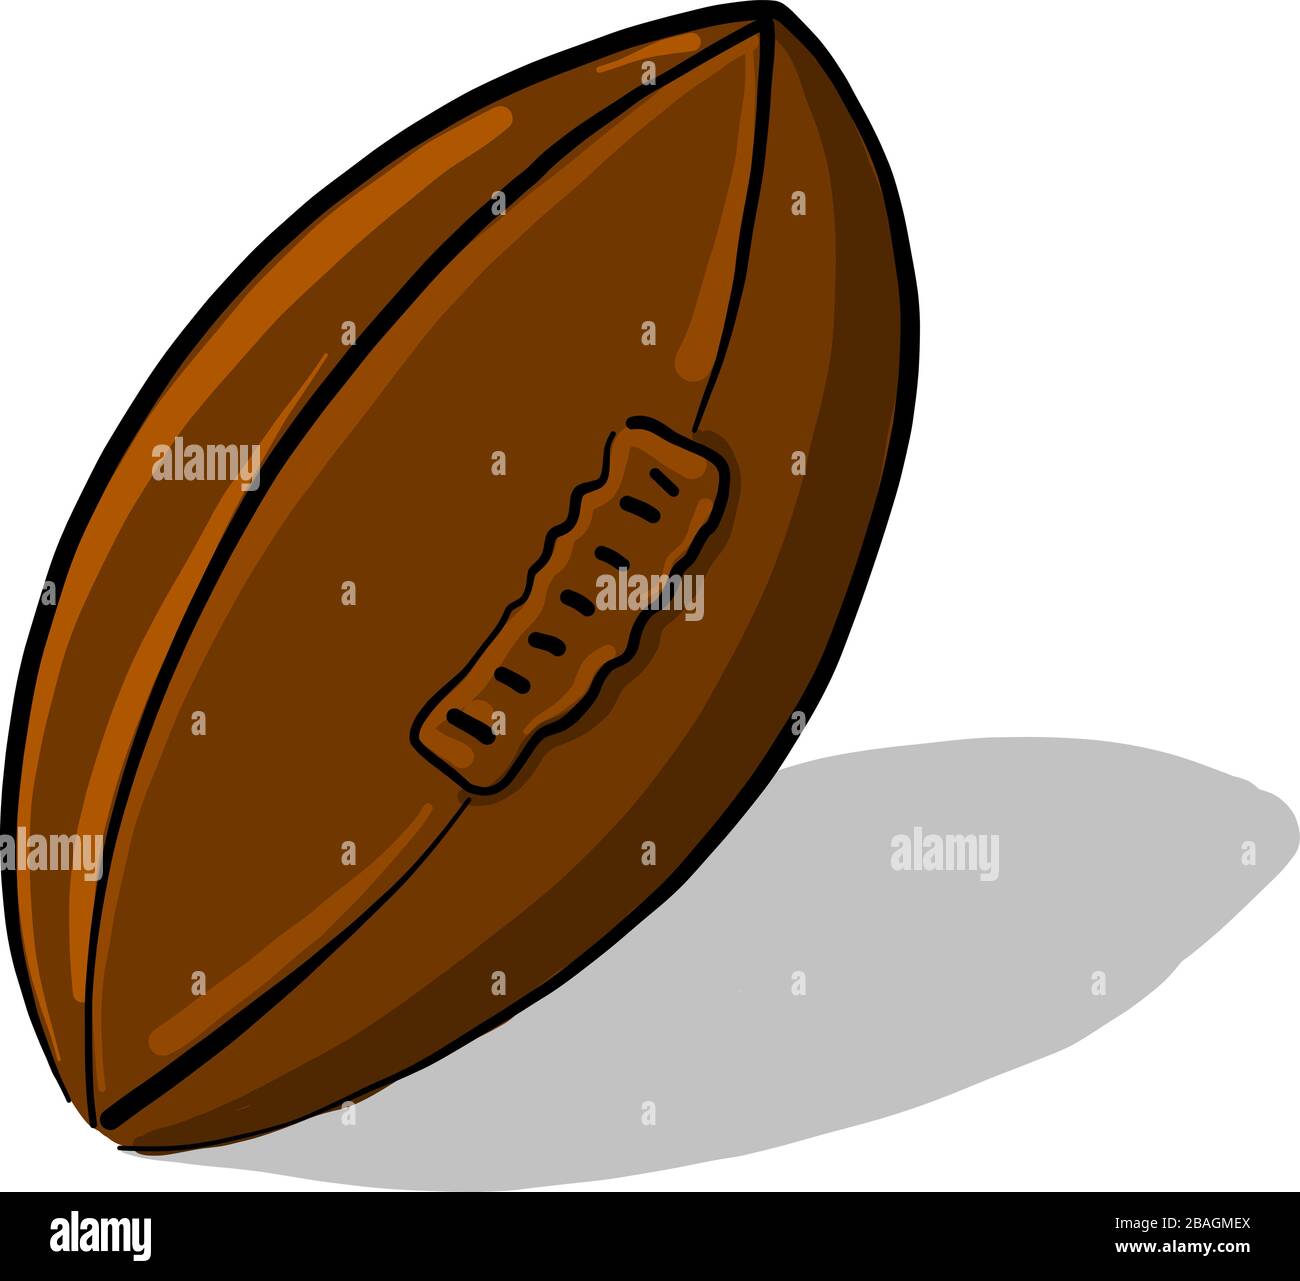 Old rugby ball, illustration, vector on white background Stock Vector